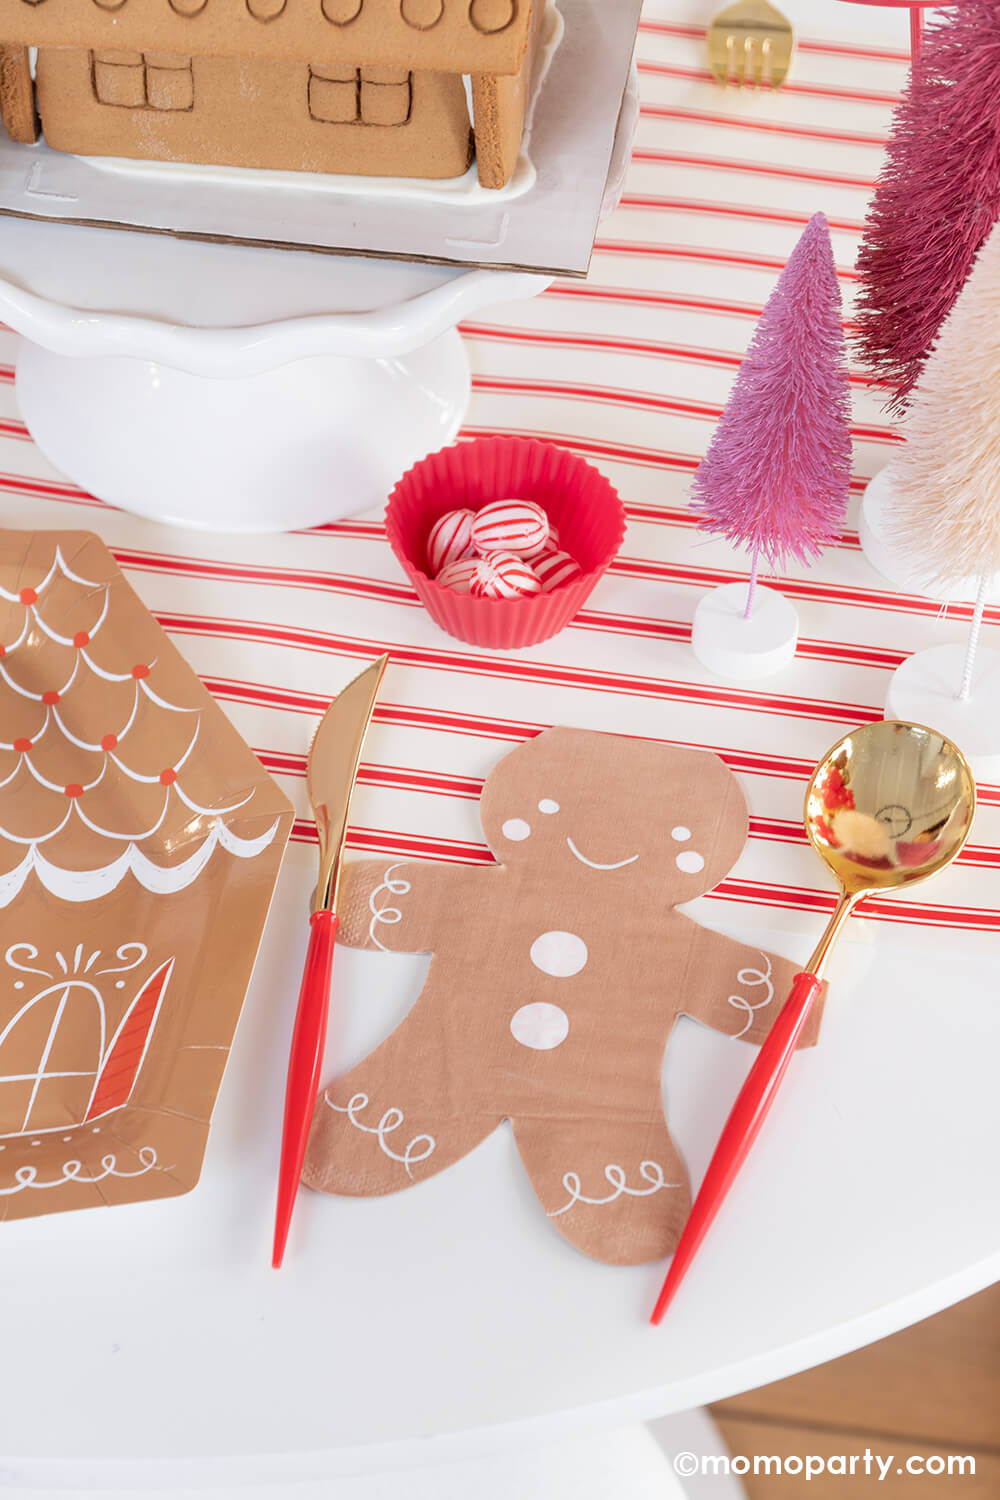 A gingerbread themed Holiday party table featuring Momo Party's red and gold reusable cutlery and smiley gingerbread man napkins. On the table is some bottle brush Christmas trees in various shades of pink and a gingerbread house ready to be decorated by kids.